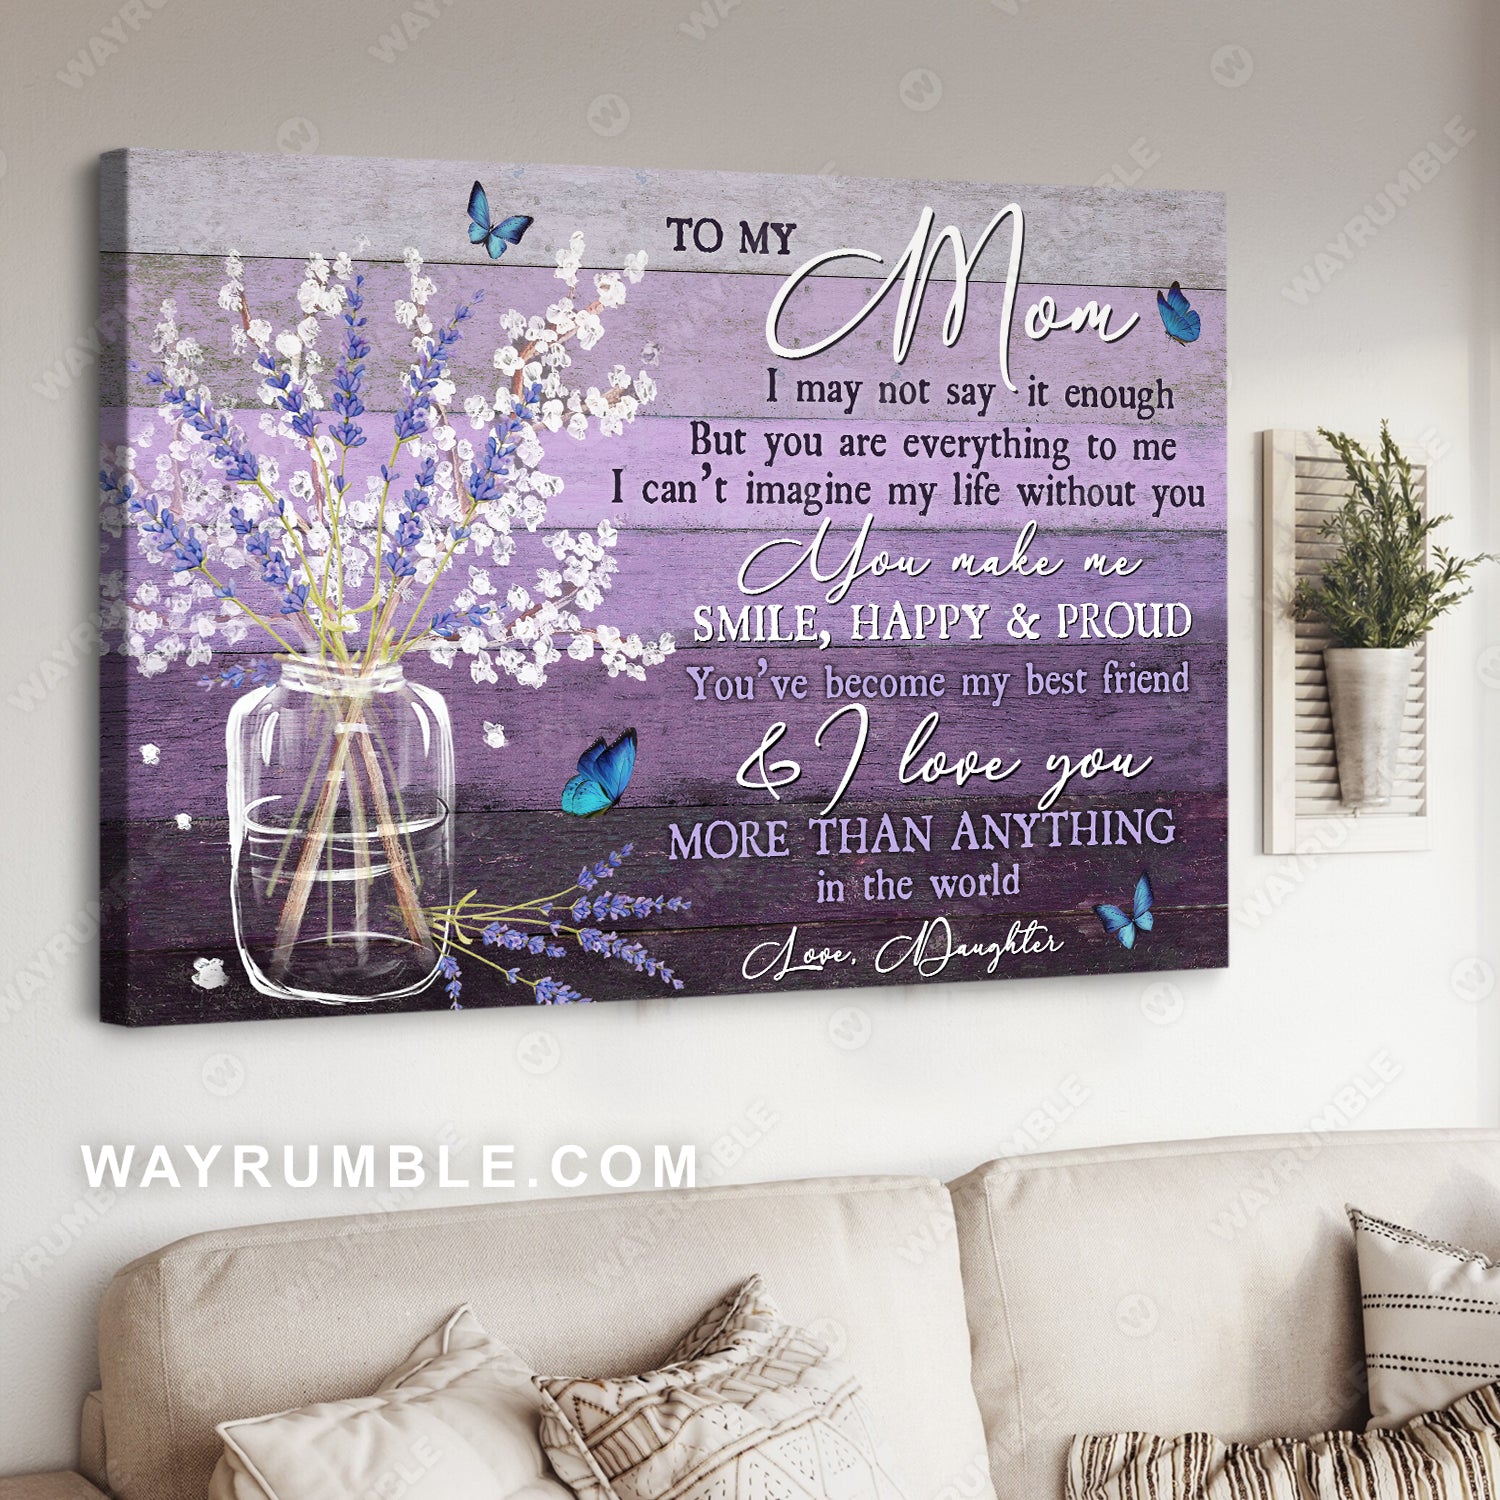 Daughter to mom, Lavender flower, Blue butterfly, You make me smile, Happy, And proud - Family Landscape Canvas Prints, Wall Art